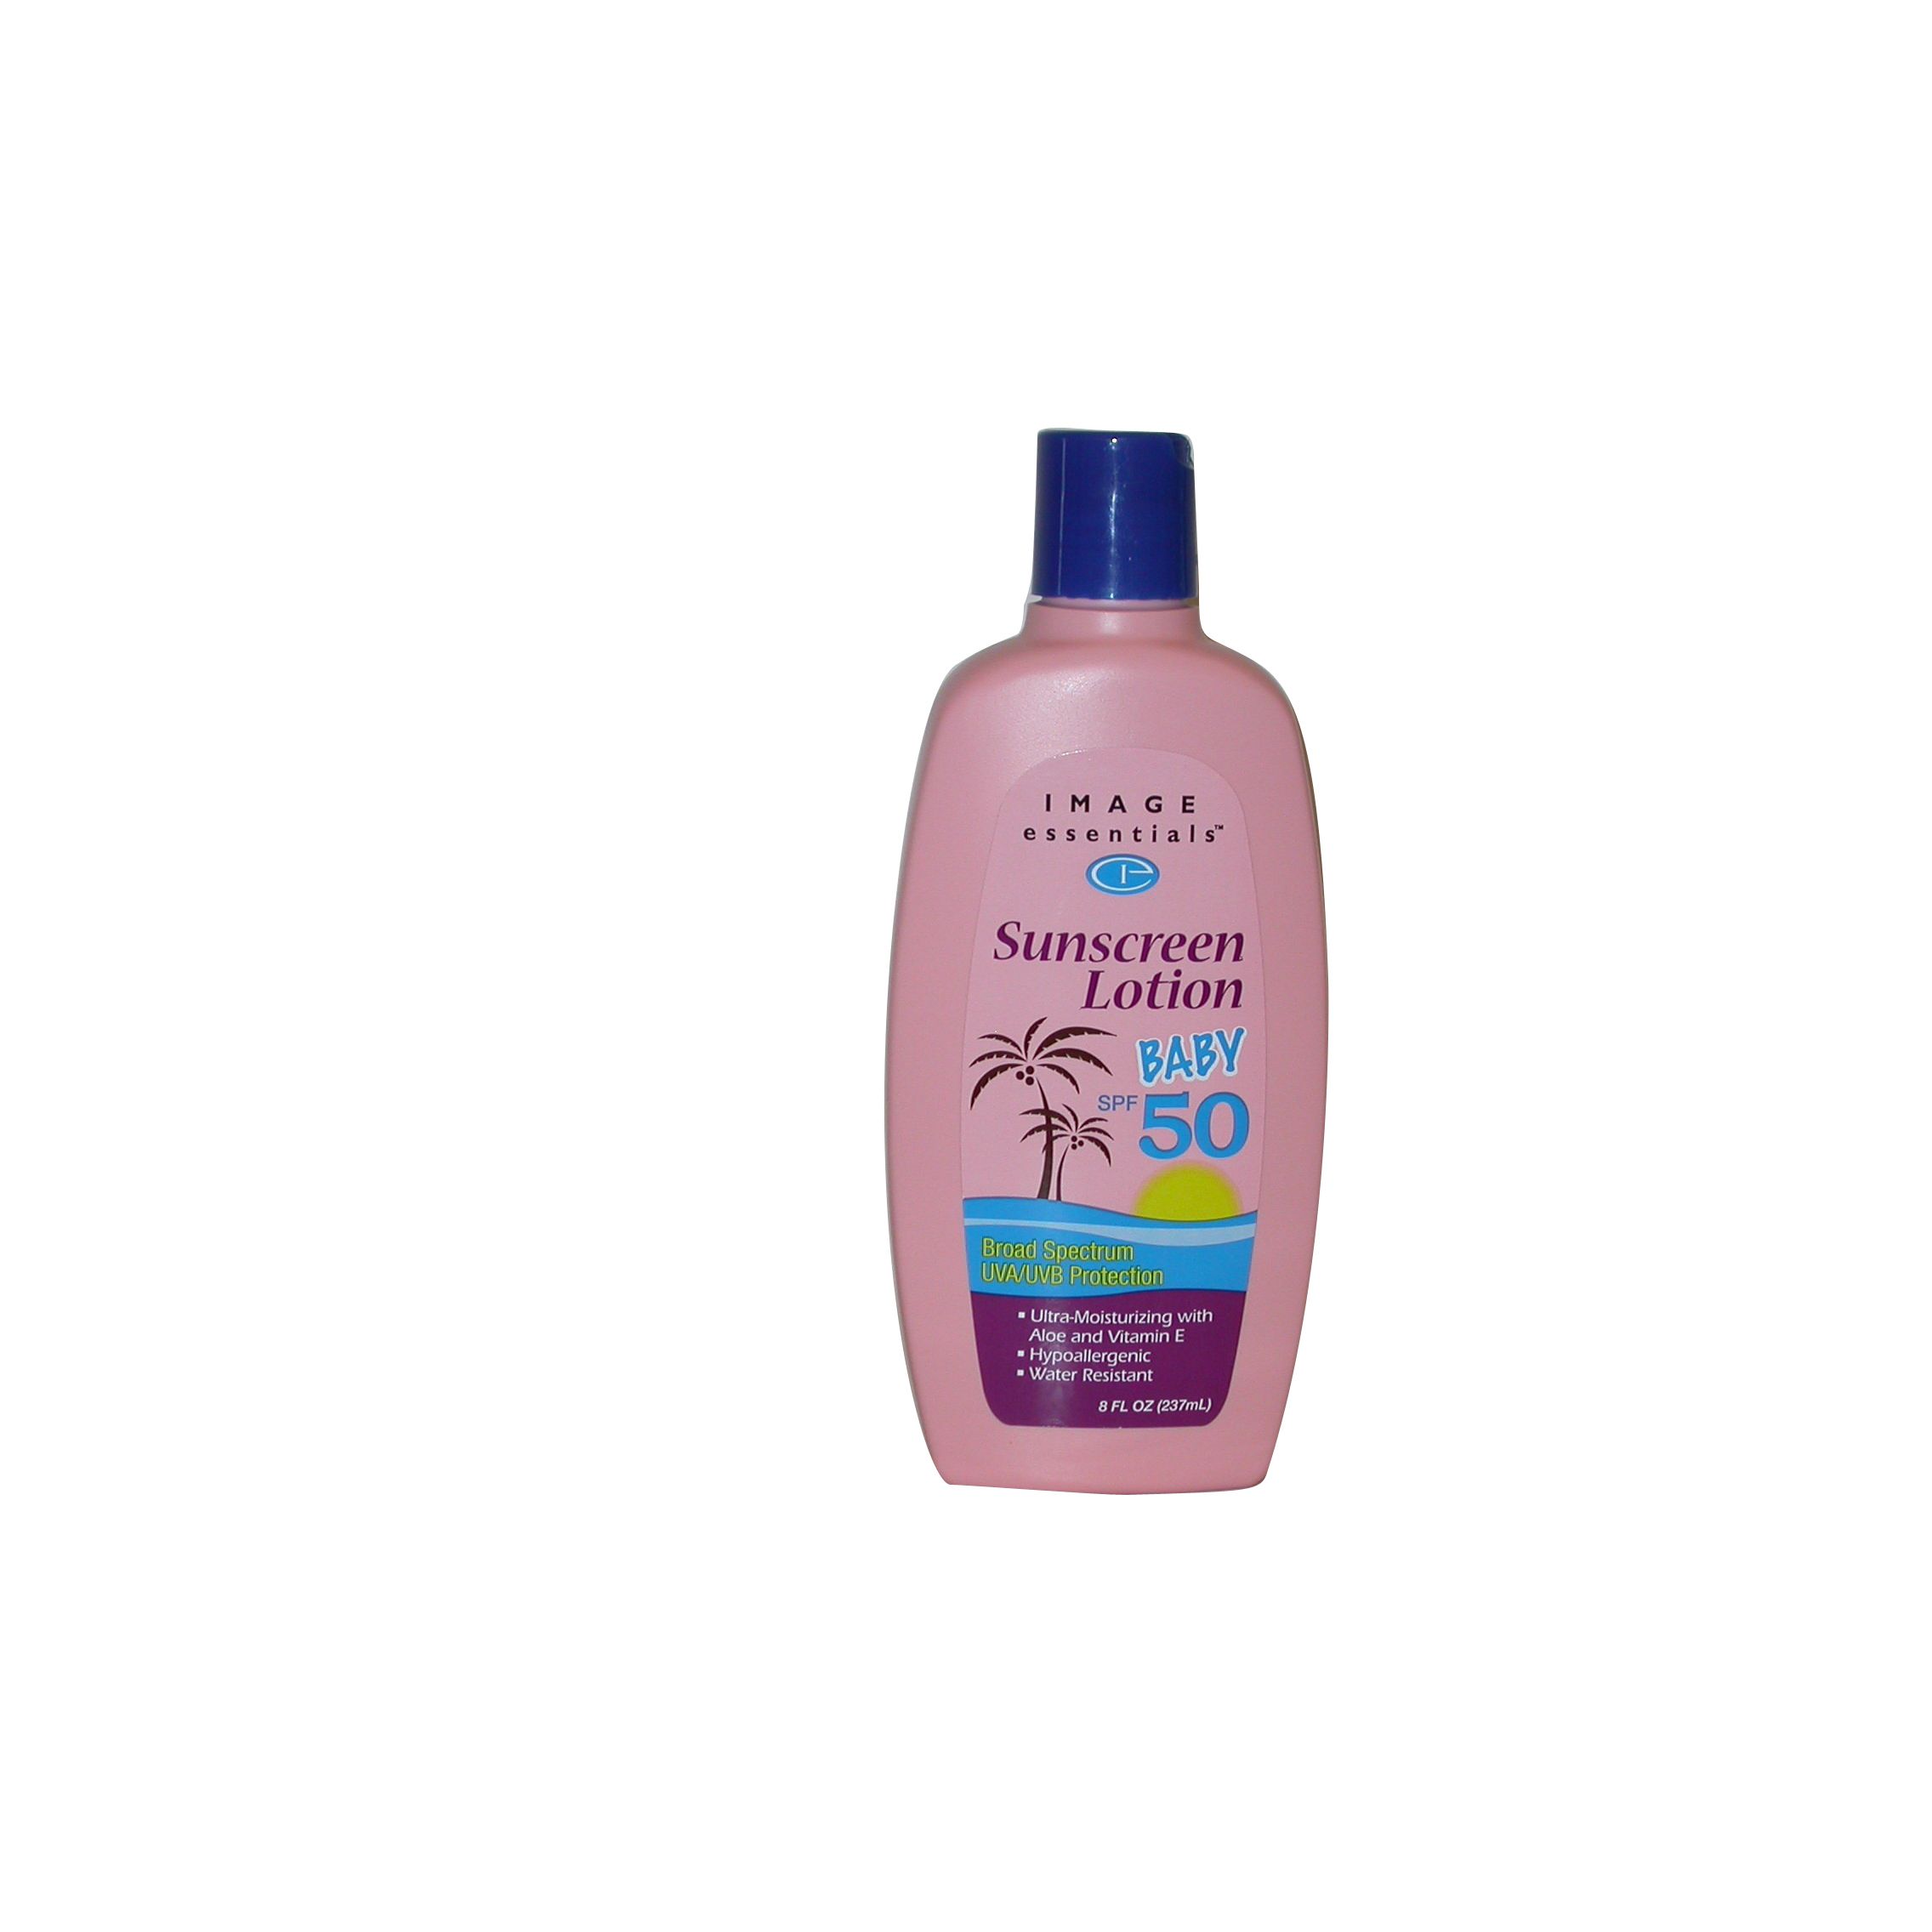 Image Essentials Sunscreen Lotion Baby SPF 50 8 Fluid Ounce